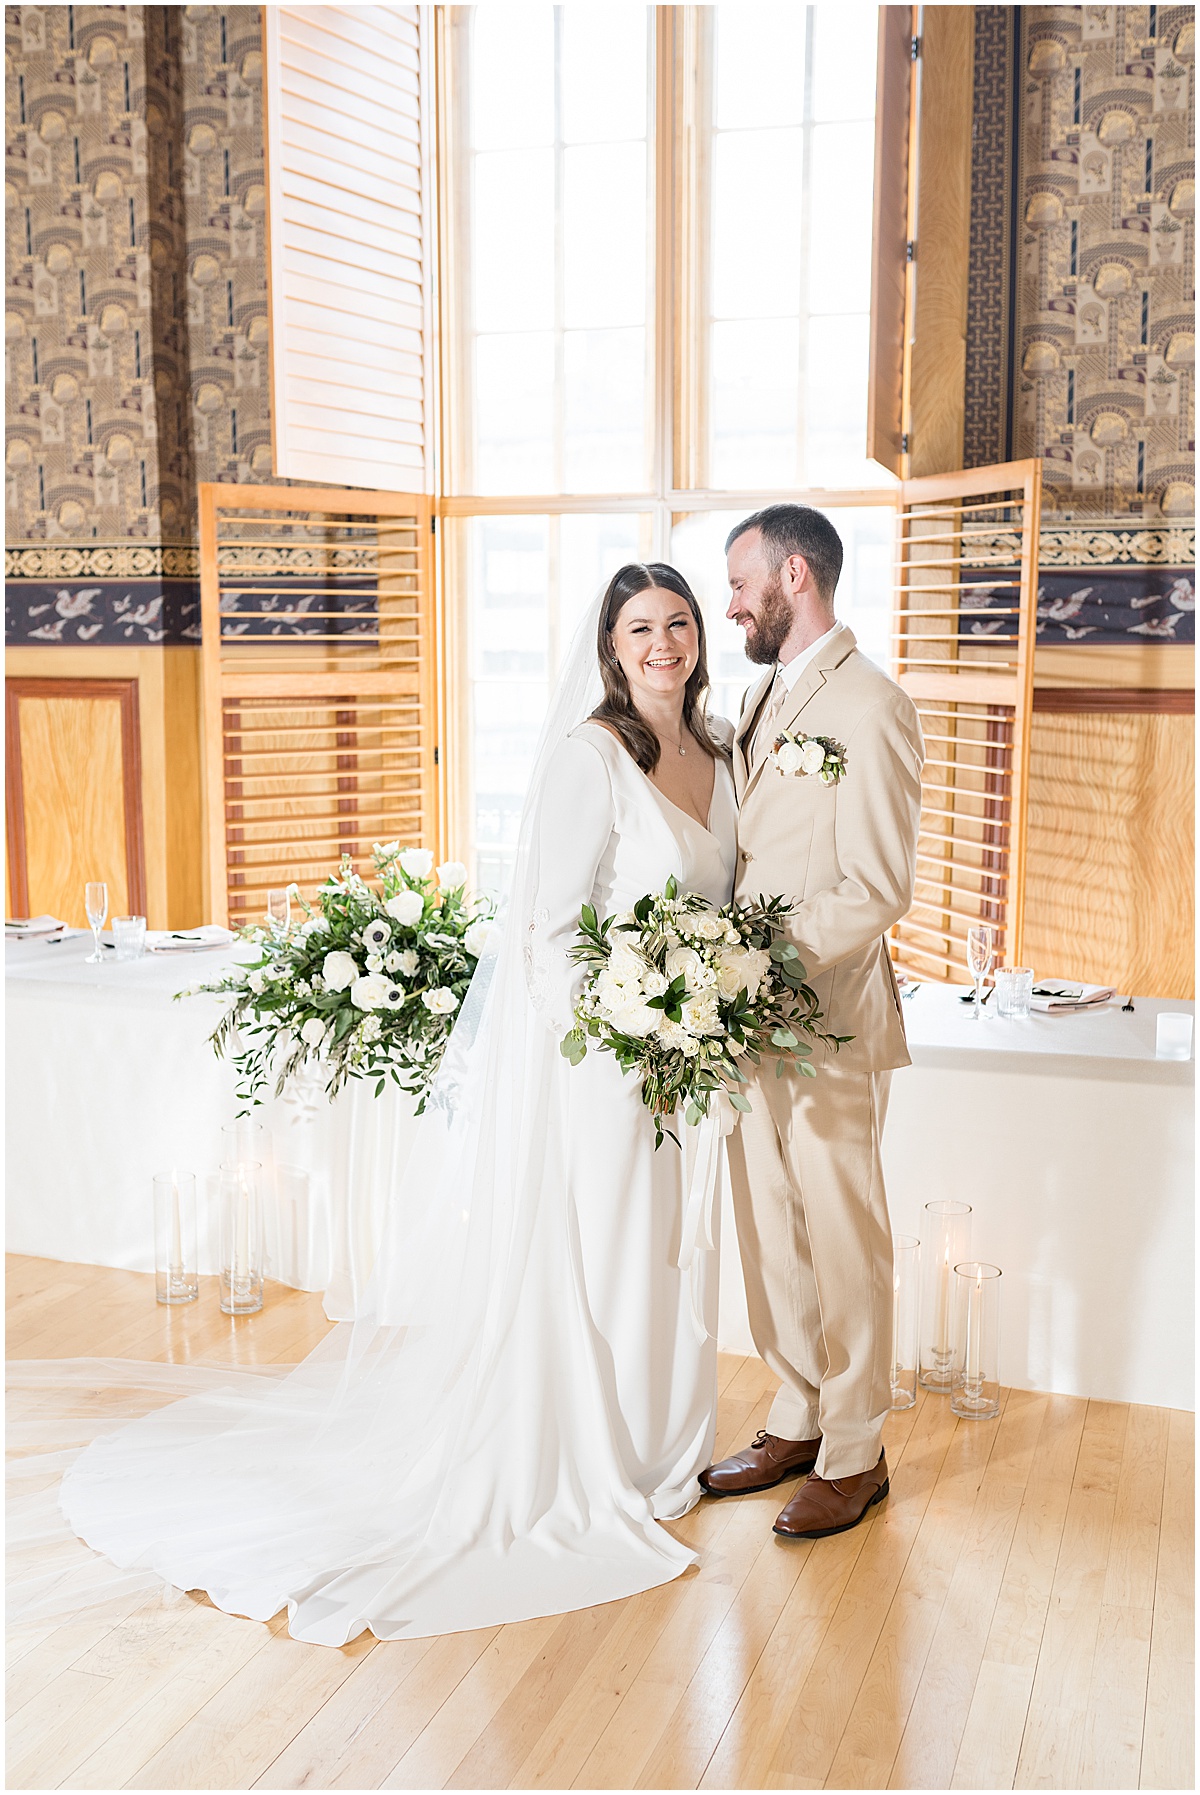 Bride and groom get close at Delphi Opera House wedding photographed by Victoria Rayburn Photography